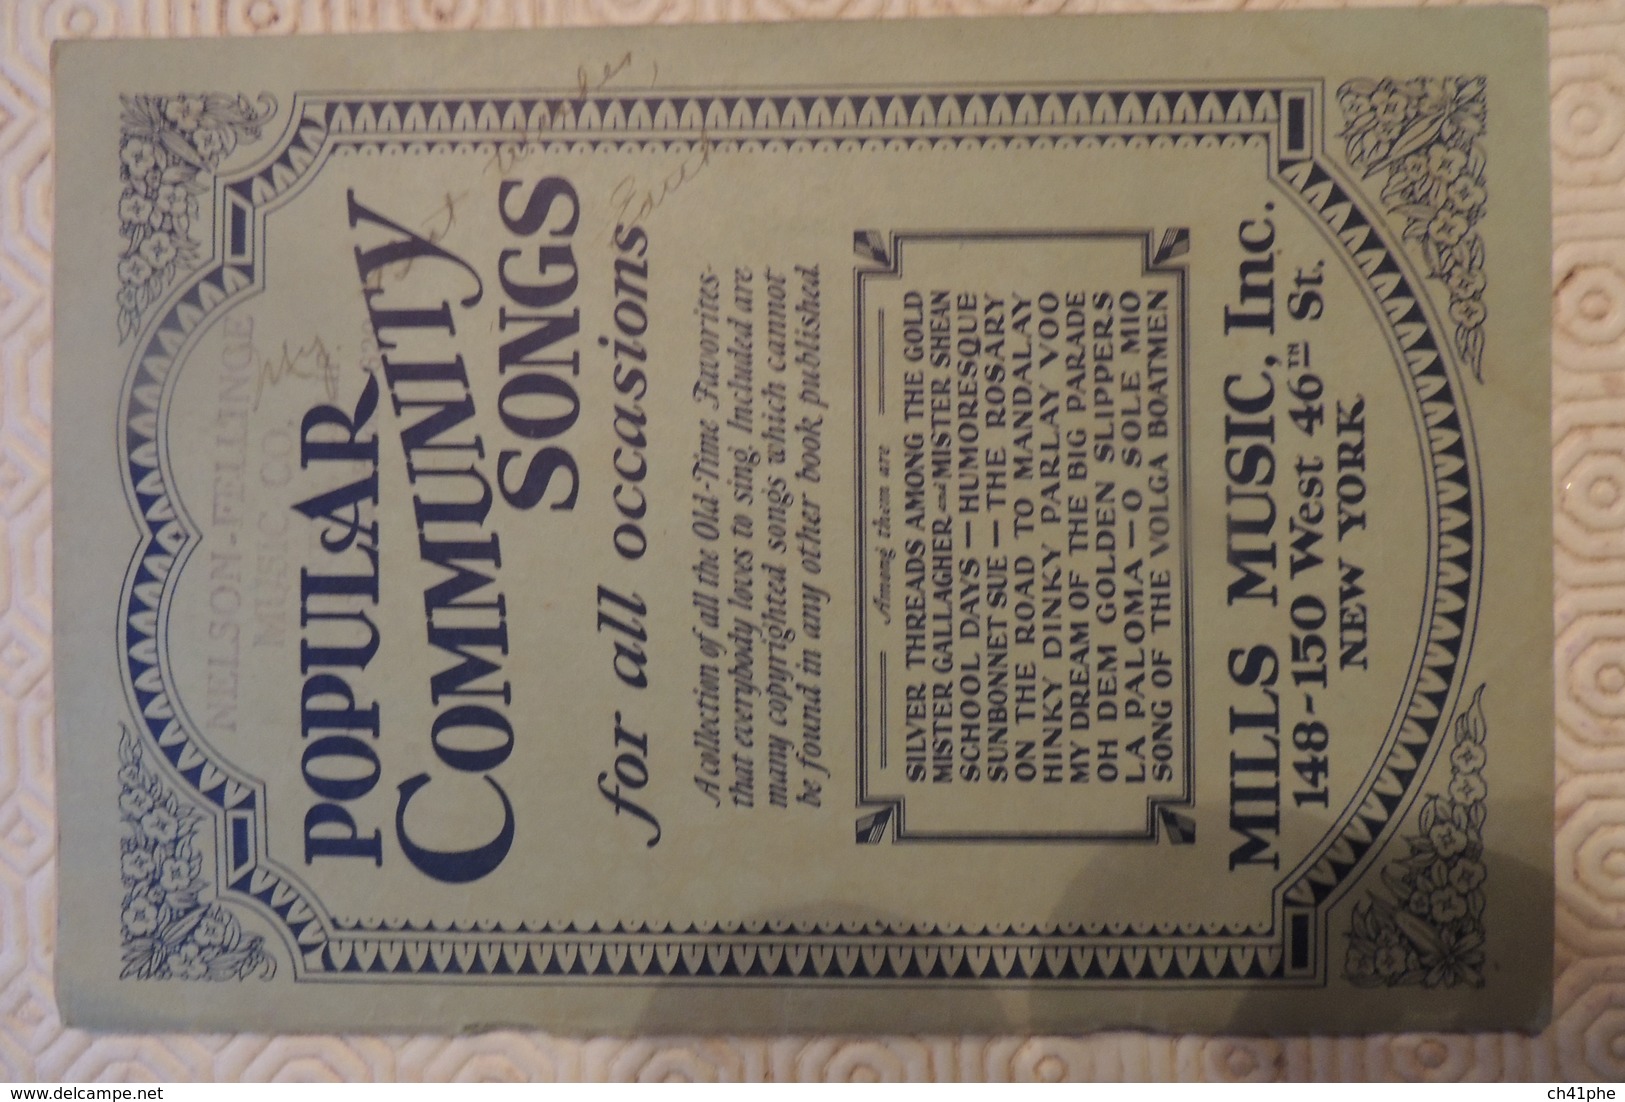 POPULAR COMMUNITY SONG FOR ALL OCCASIONS / MILLS MUSIC NEW YORK / 72 PAGES / 1920 - 1930 - Kultur